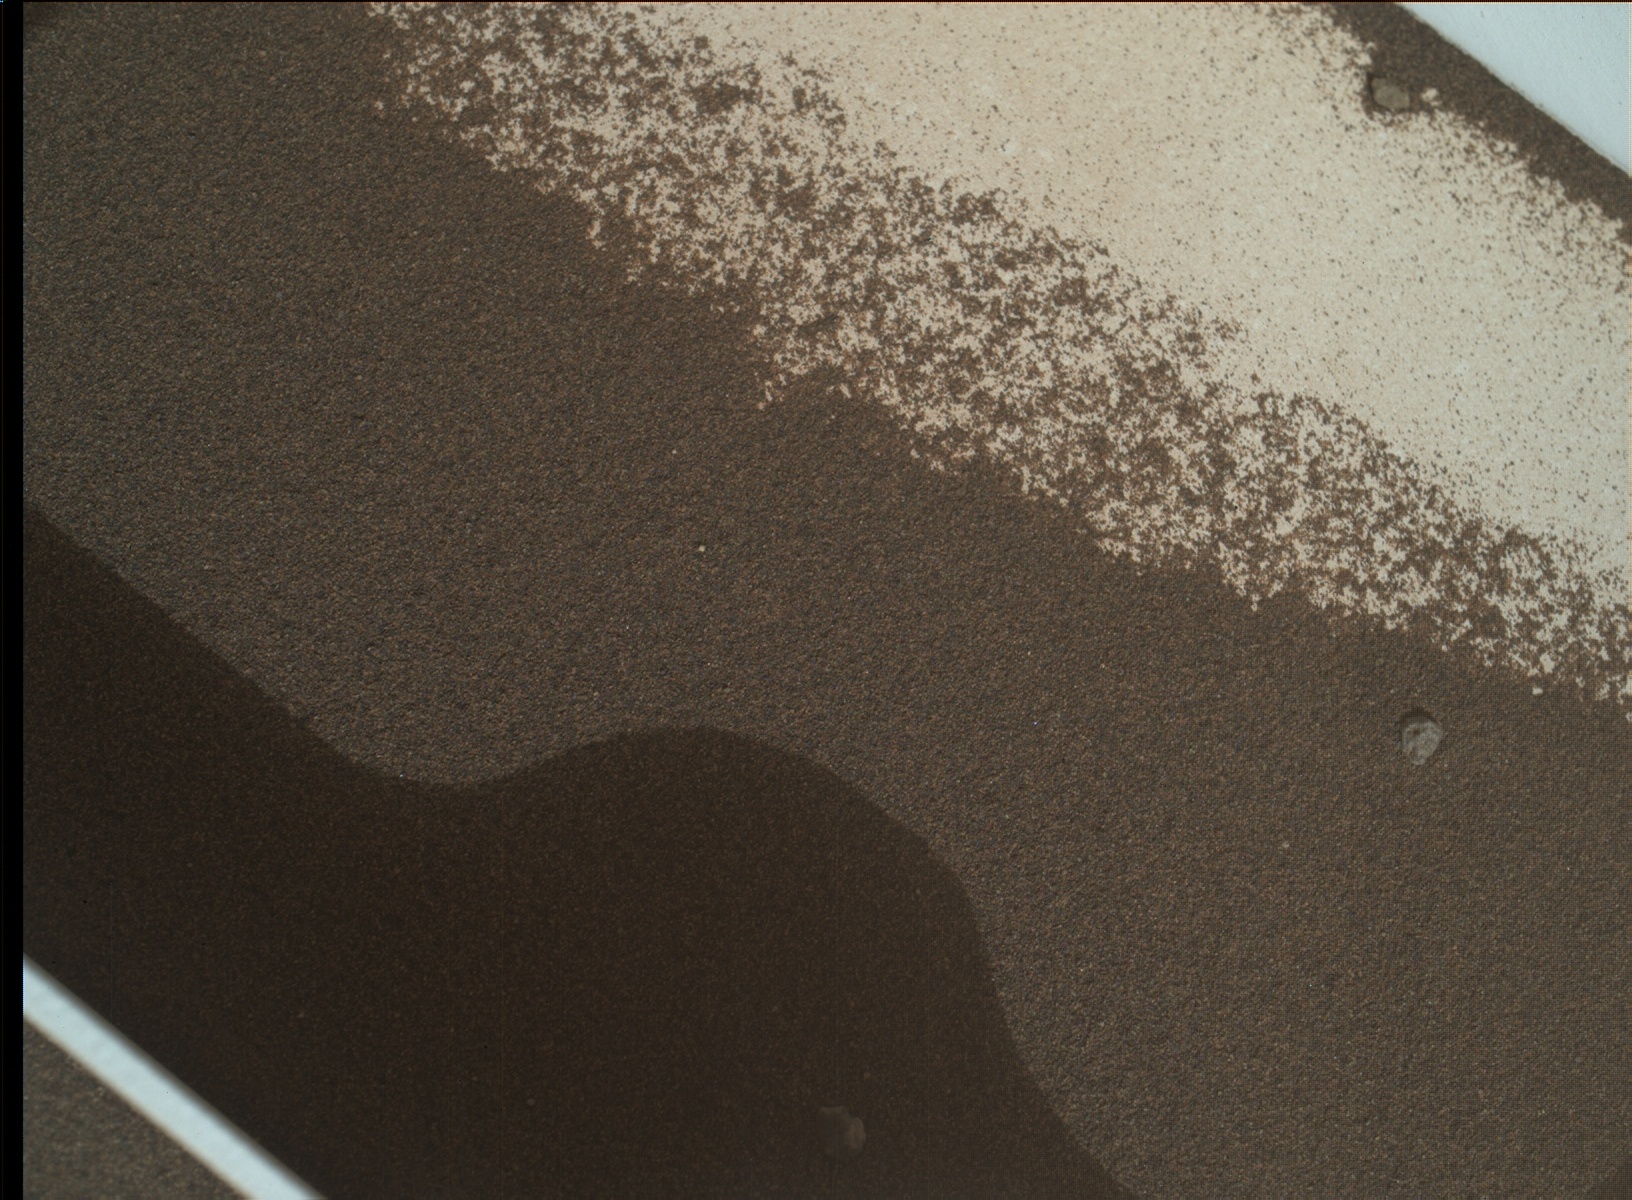 Nasa's Mars rover Curiosity acquired this image using its Mars Hand Lens Imager (MAHLI) on Sol 1741